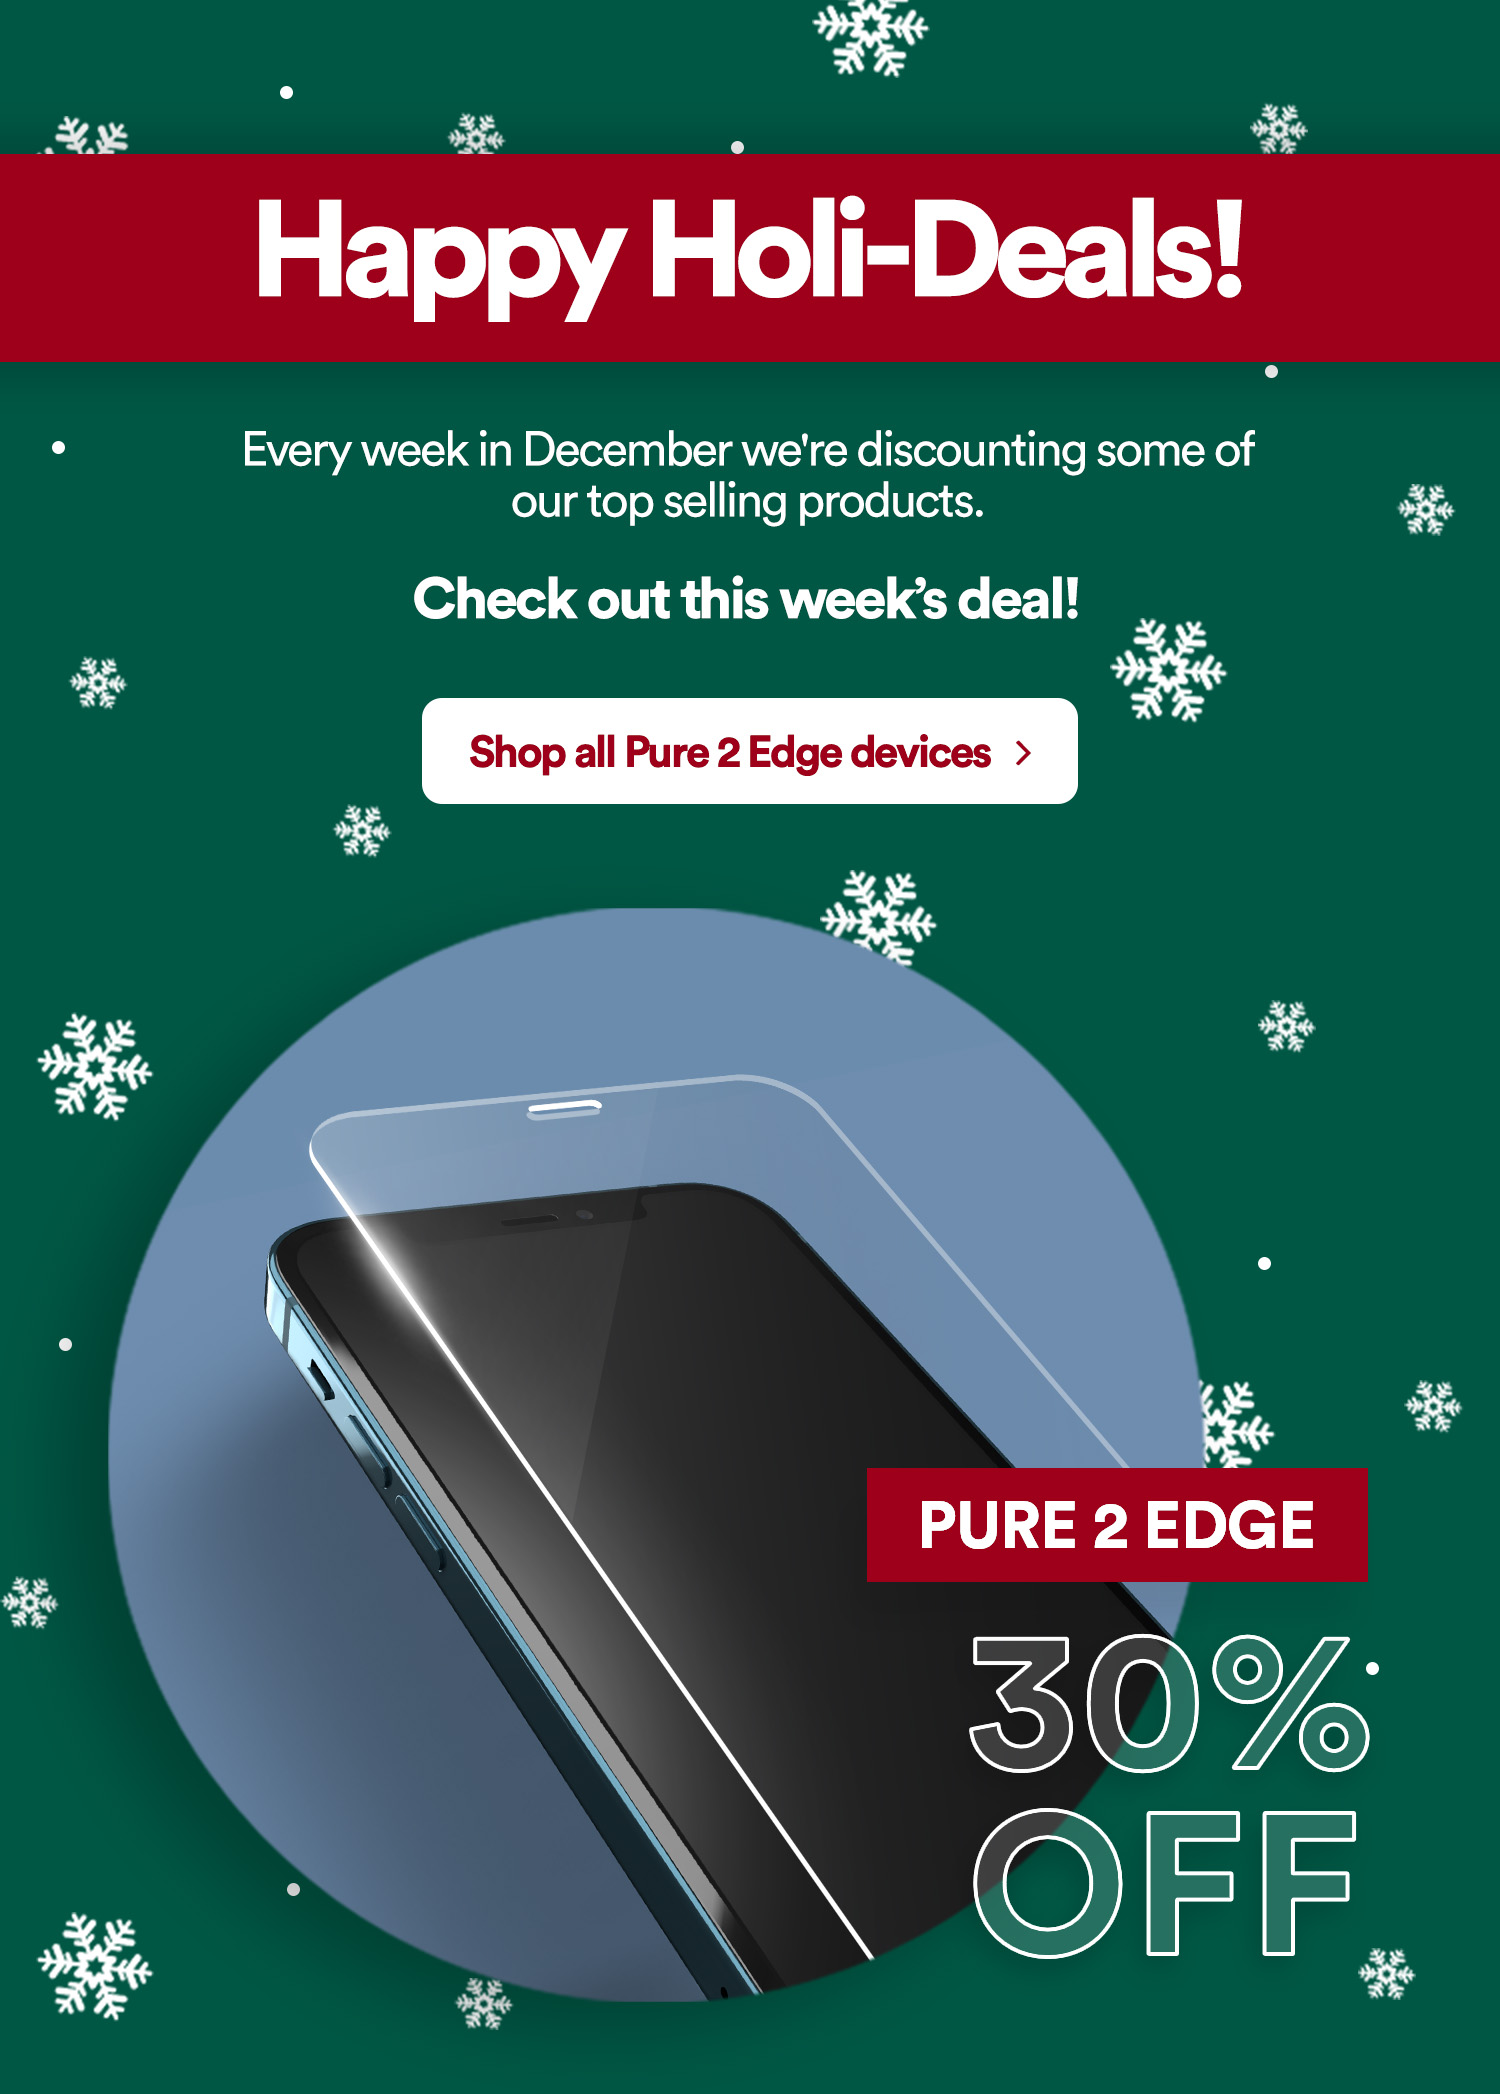 Get Pure 2 Edge for 30%!